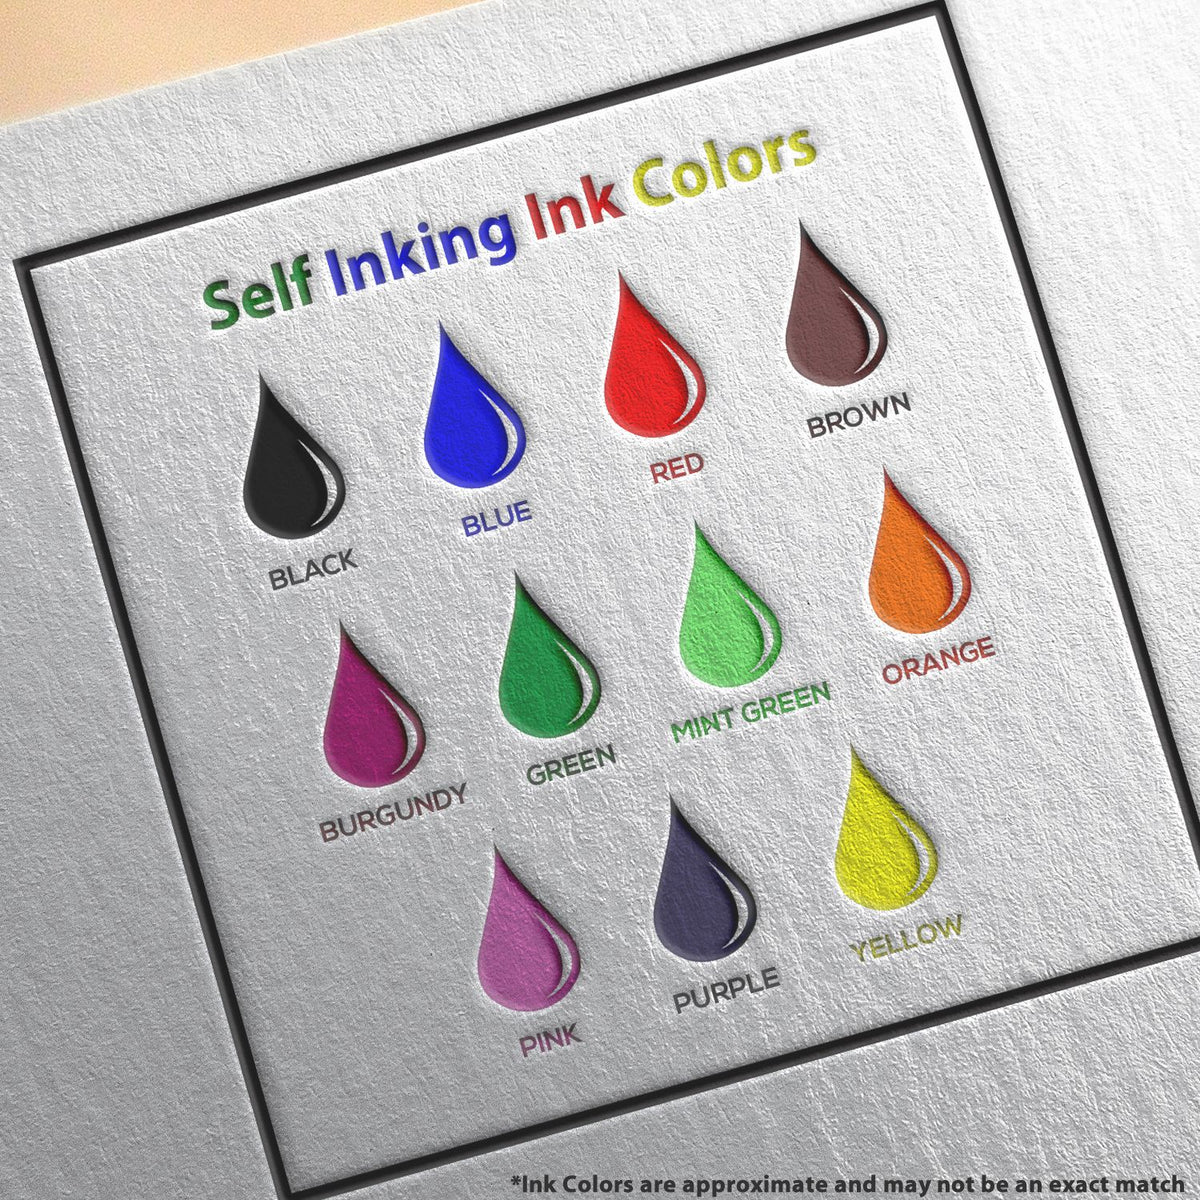 A picture showing the different ink colors or hues available for the Self-Inking North Carolina PE Stamp product.